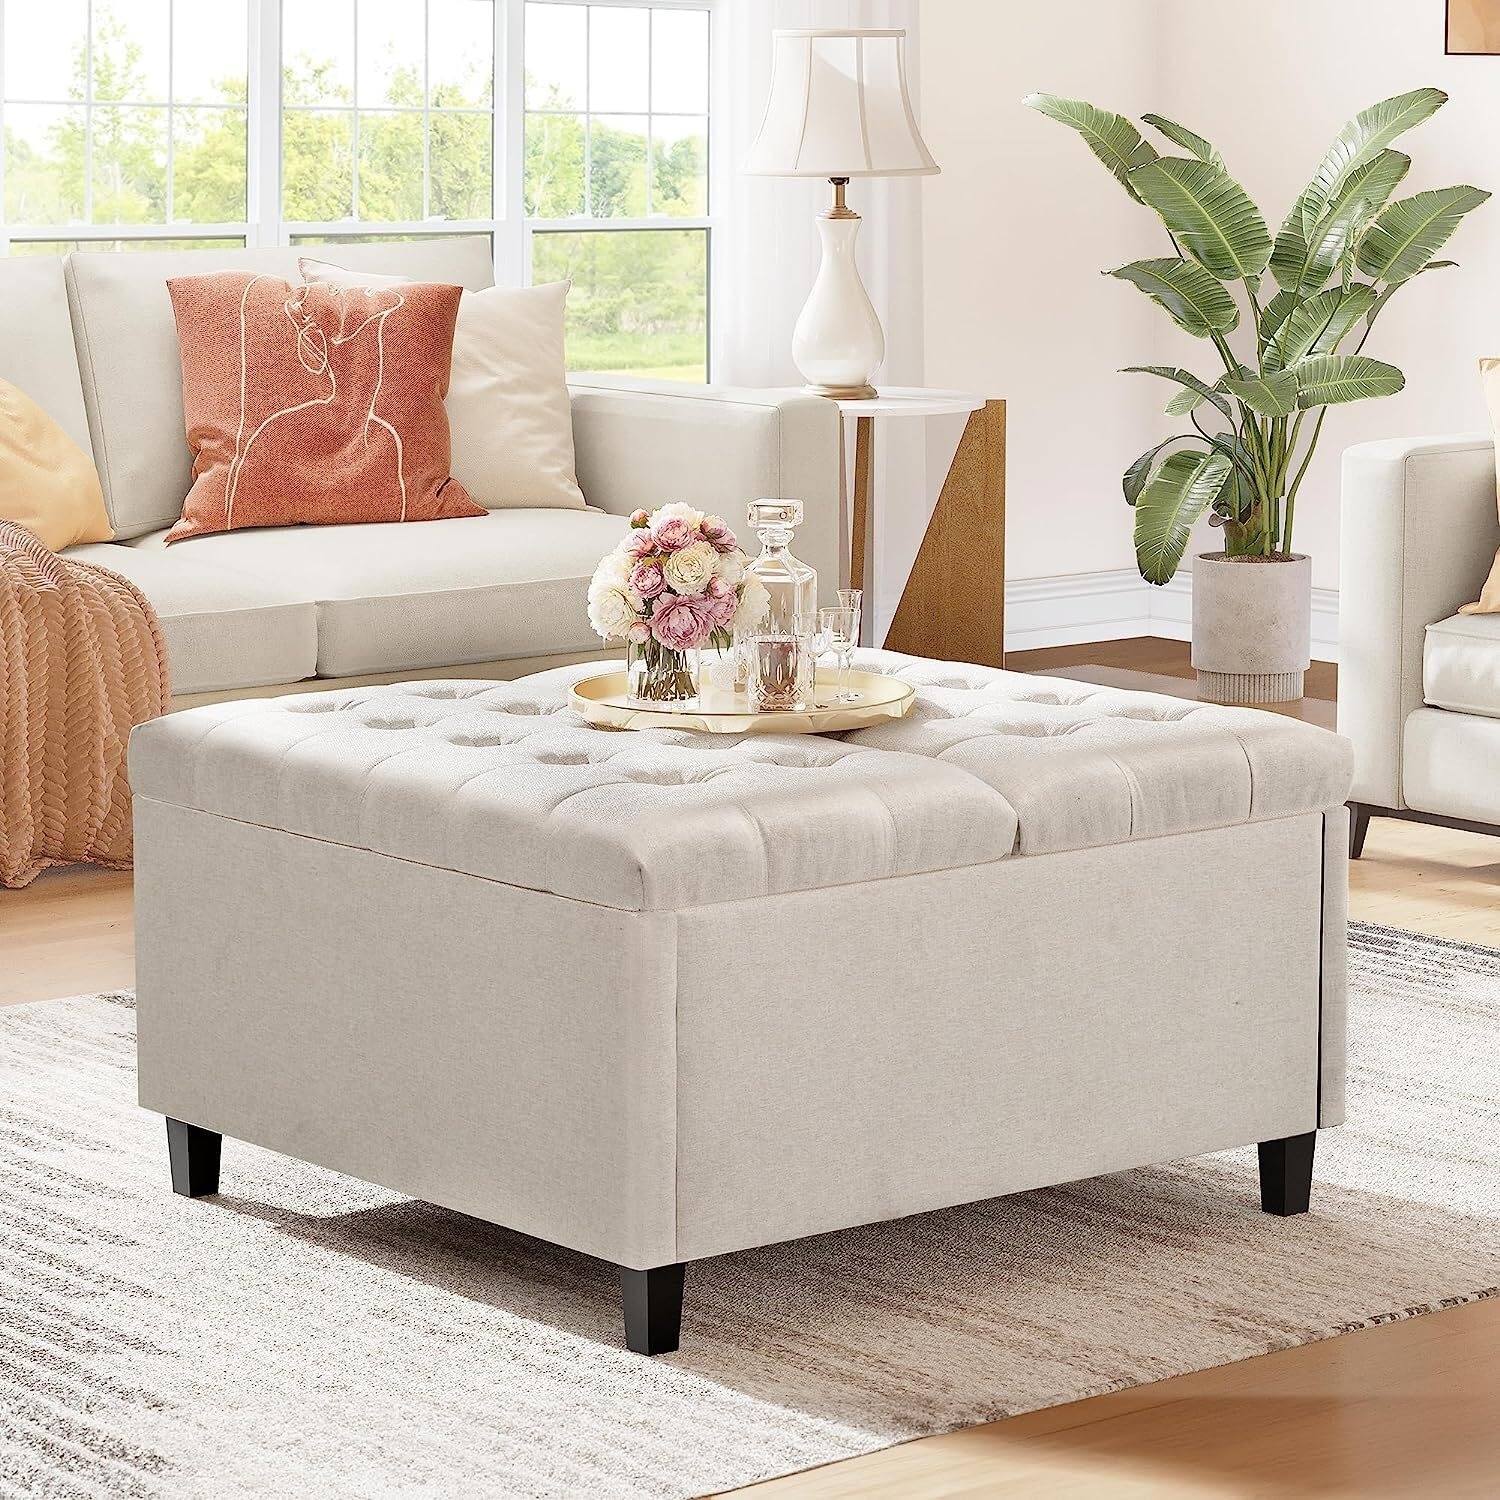 Tufted Storage Ottoman Lift Top Coffee Table